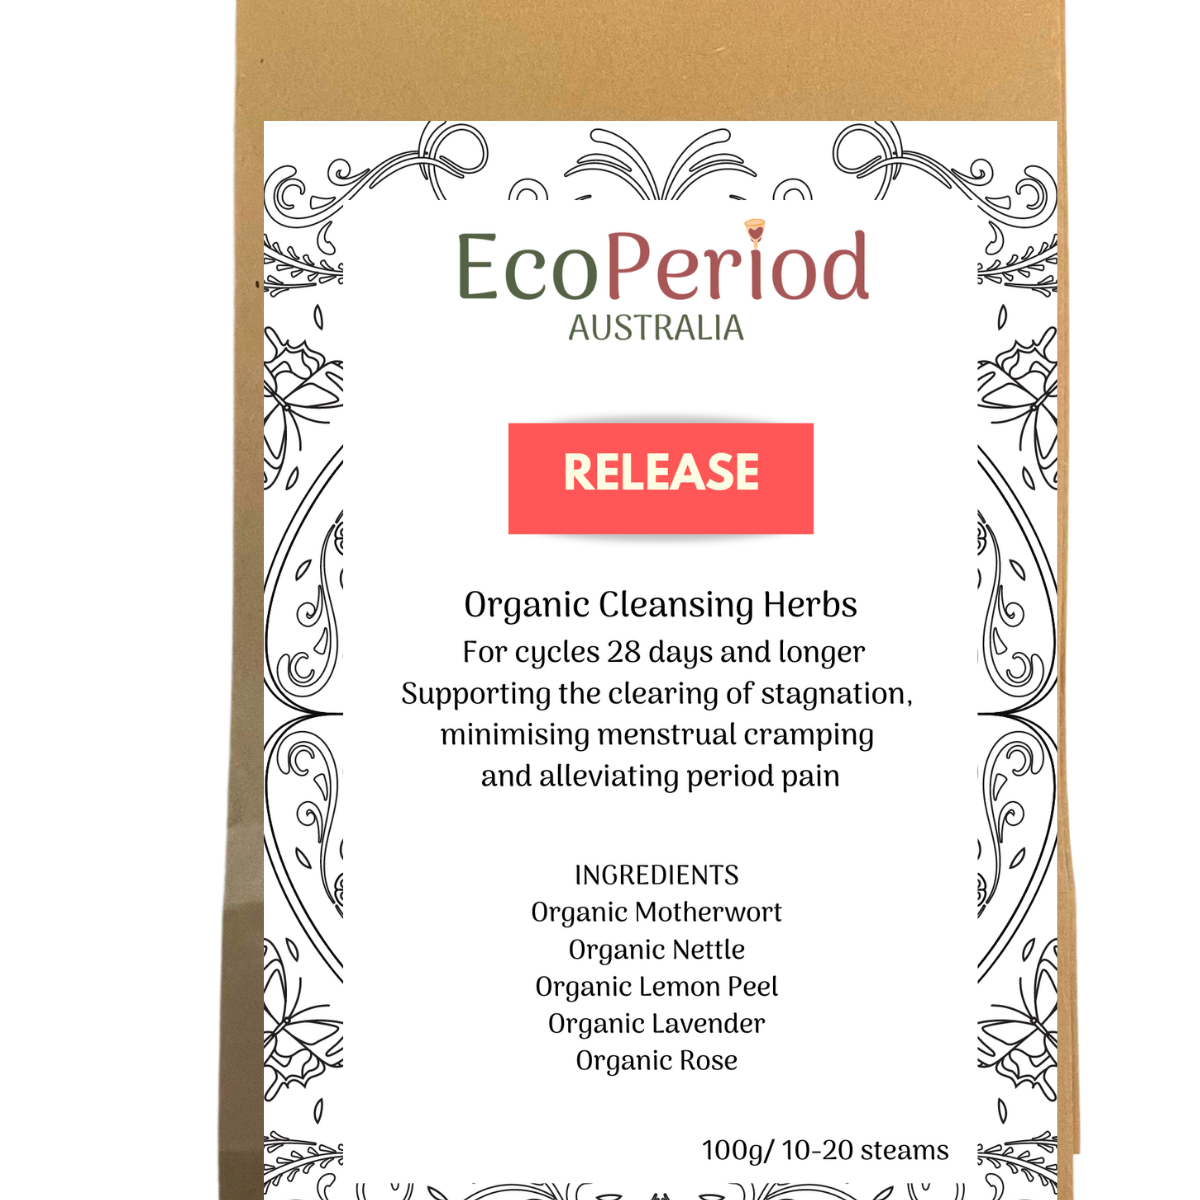 Release-organiccleansingyonisteamherbs_bd024fc5-52a2-407d-aed9-25b5953d829f.png